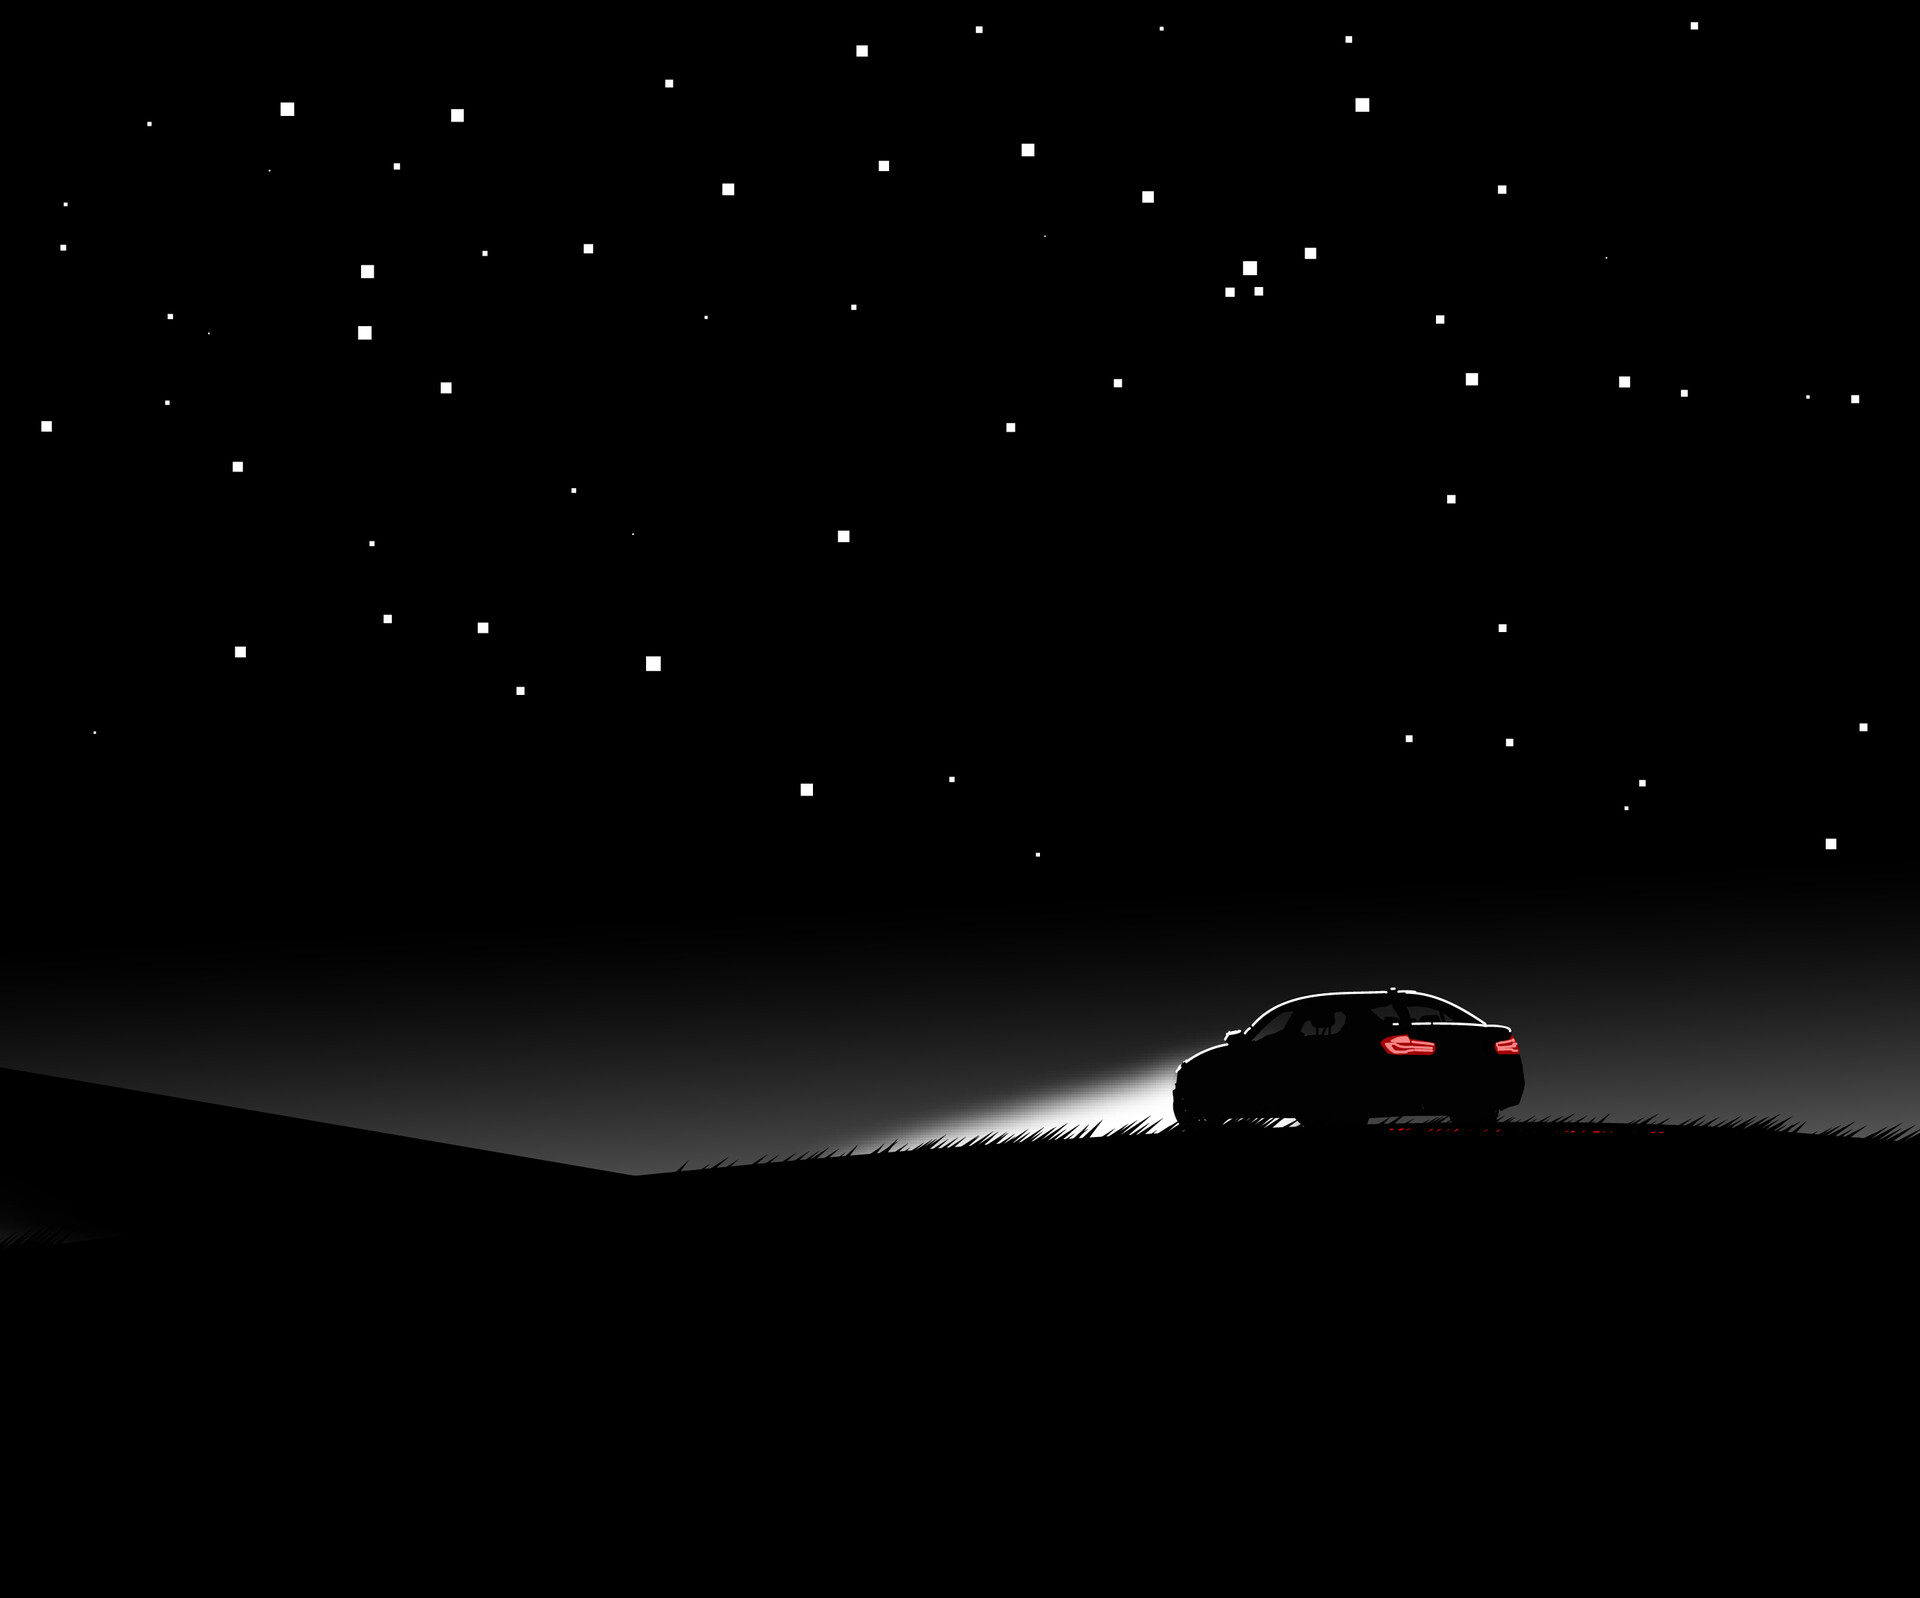 Driving Alone Wallpaper, HD Minimalist 4K Wallpapers, Images and ...